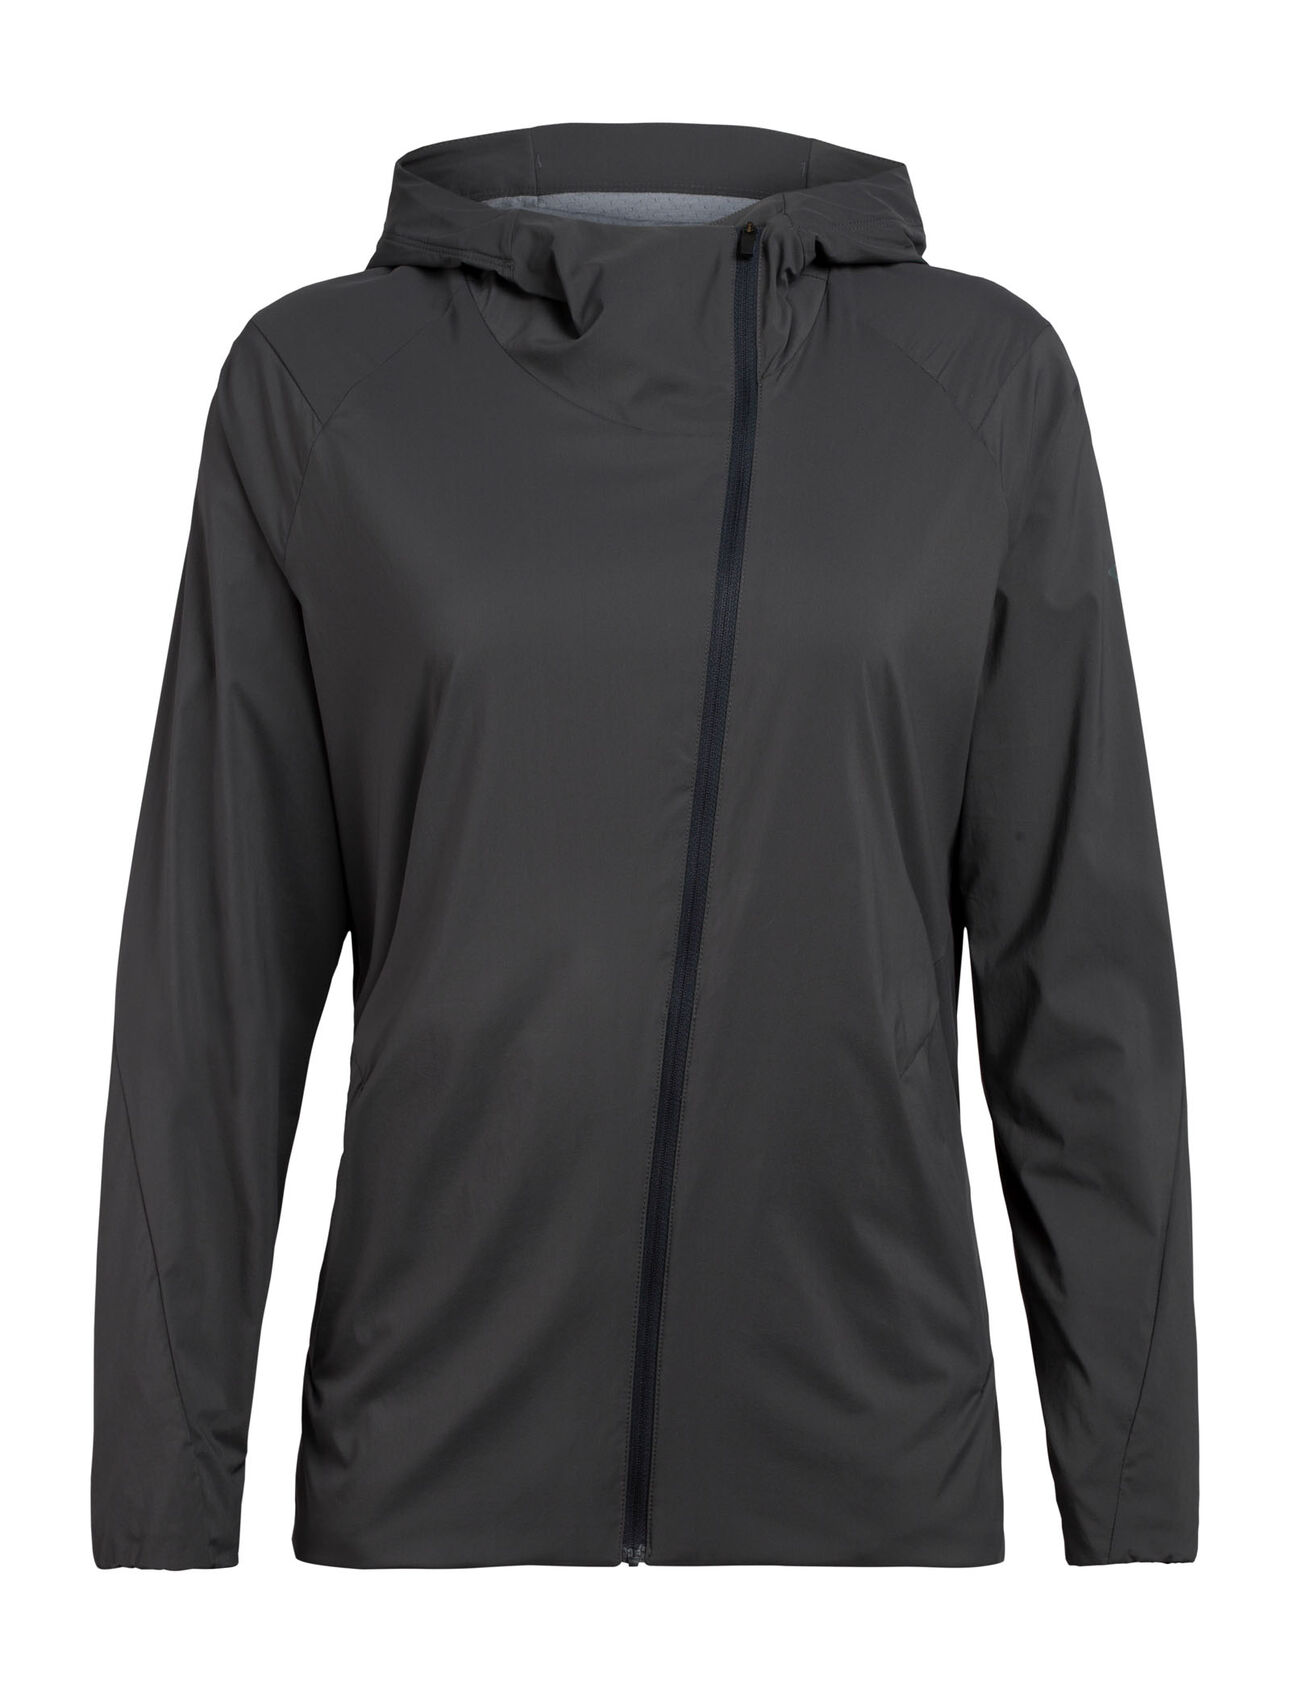 Womens Merino Tropos Hooded Windbreaker Jacket A lightweight women’s windshell made with recycled content and a moisture-wicking merino wool corespun lining, the Tropos Hooded Windbreaker shed light elements while keeping you comfortable. 